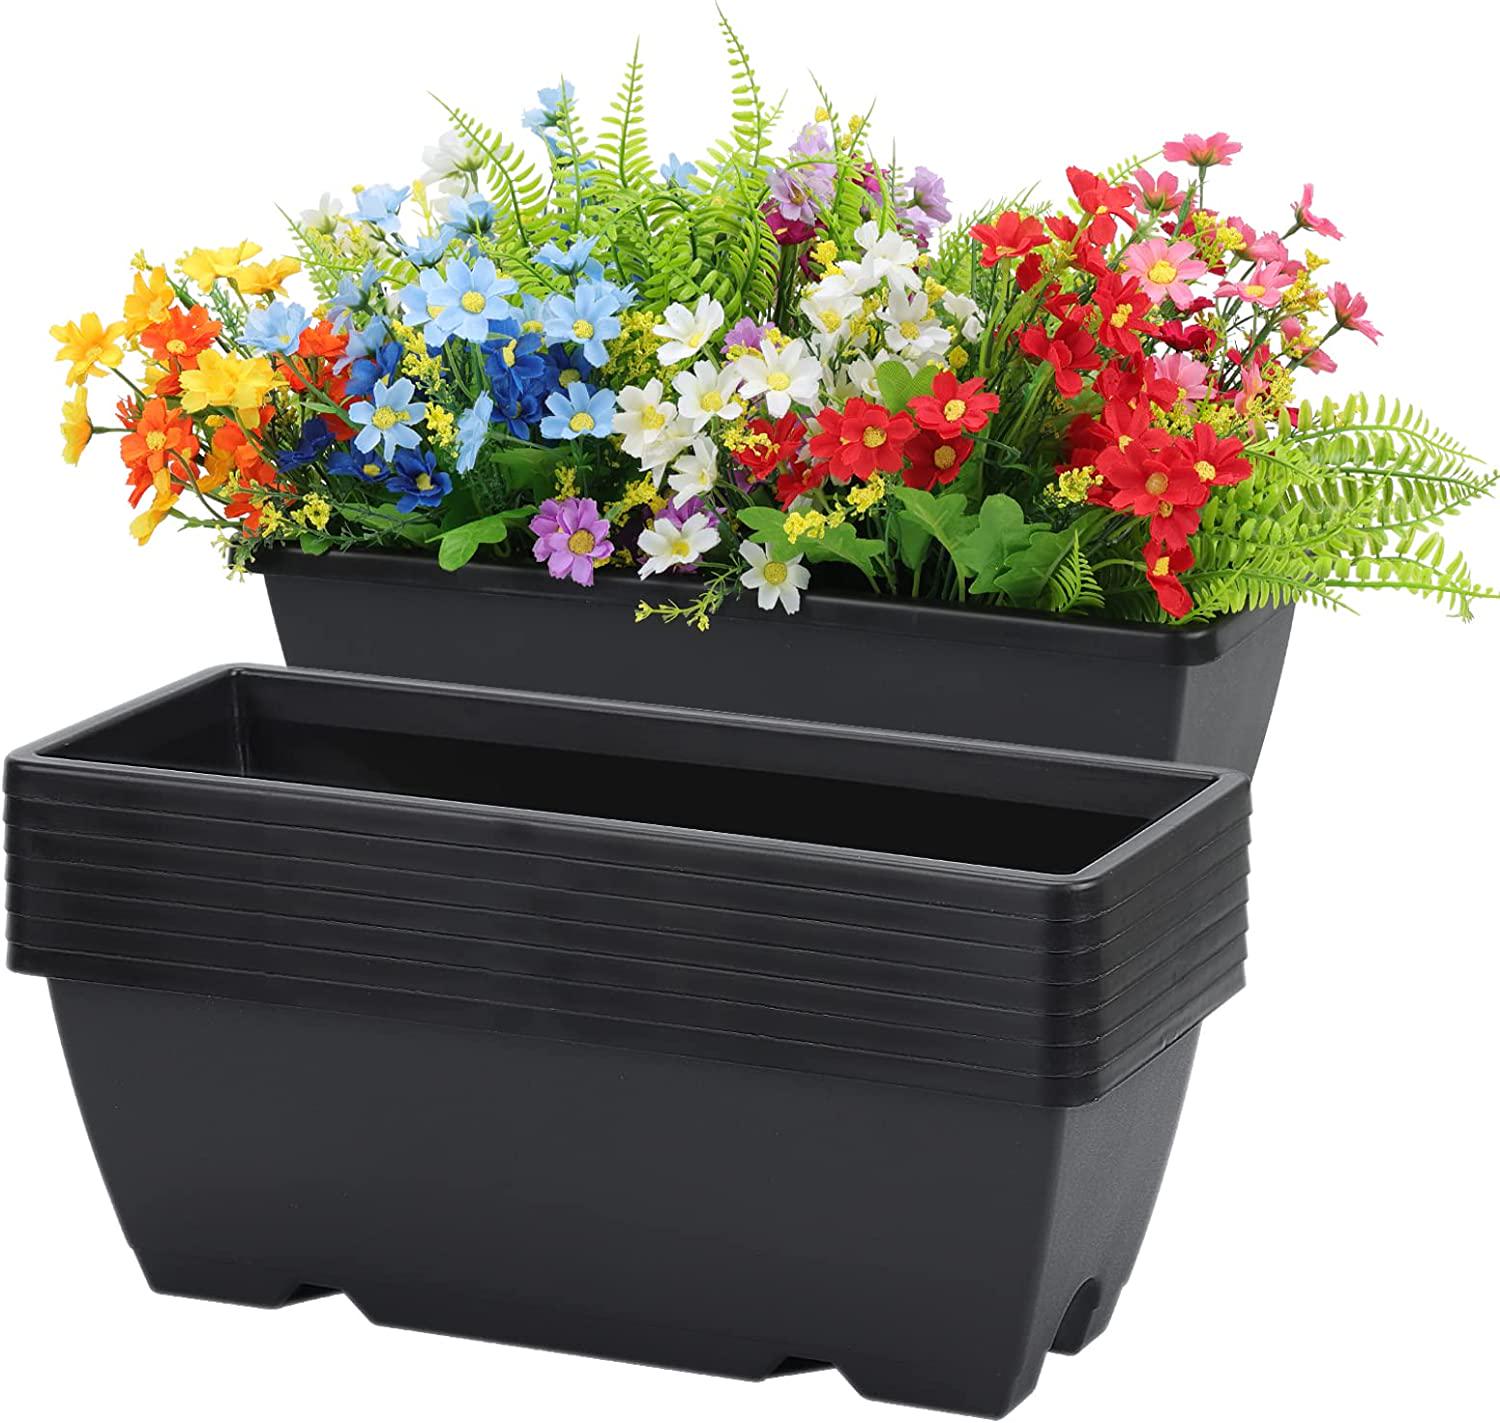 Whonline 8 Pack Window Box Planter 17 Inch Black Plastic Vegetable Flower Planters Boxes Rectangular Flower Pots with Saucers for Indoor Outdoor Garden Patio-